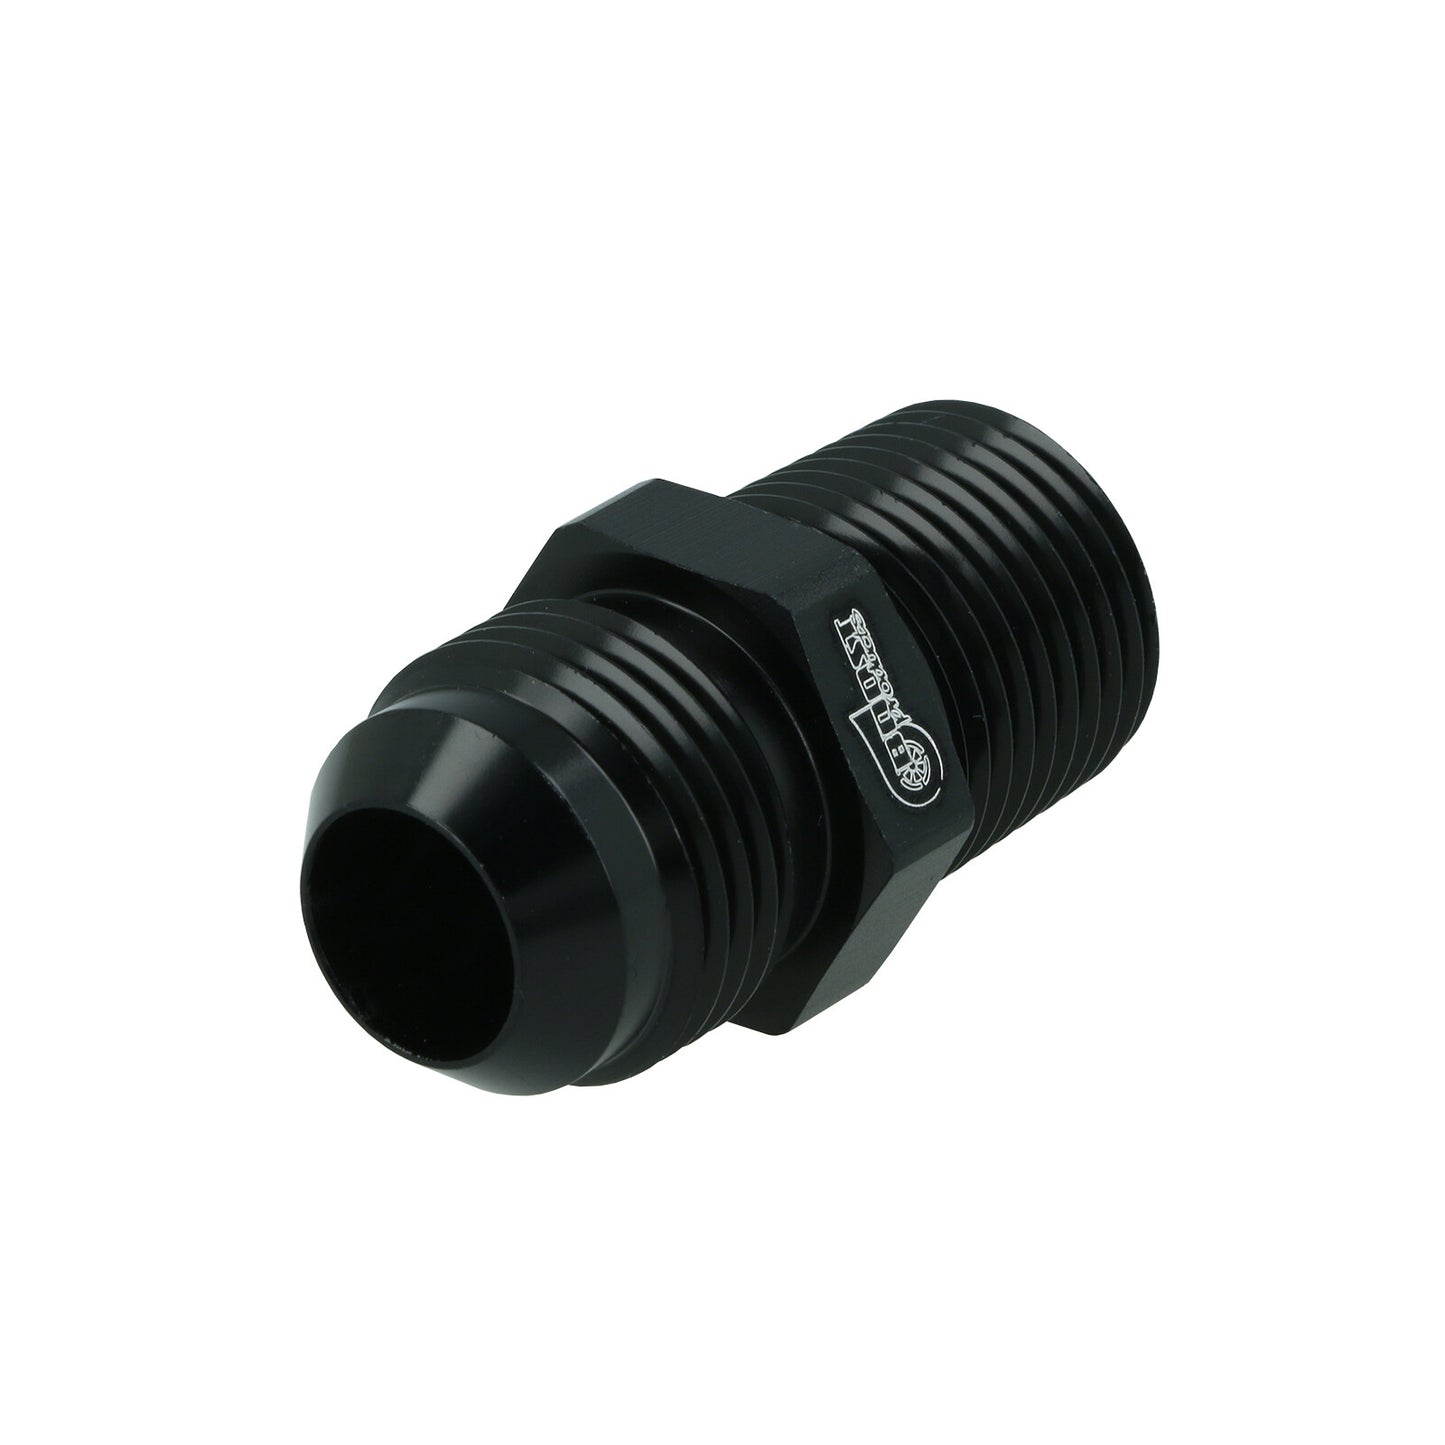 Adapter Dash 10 male to NPT 1/2" male | BOOST products